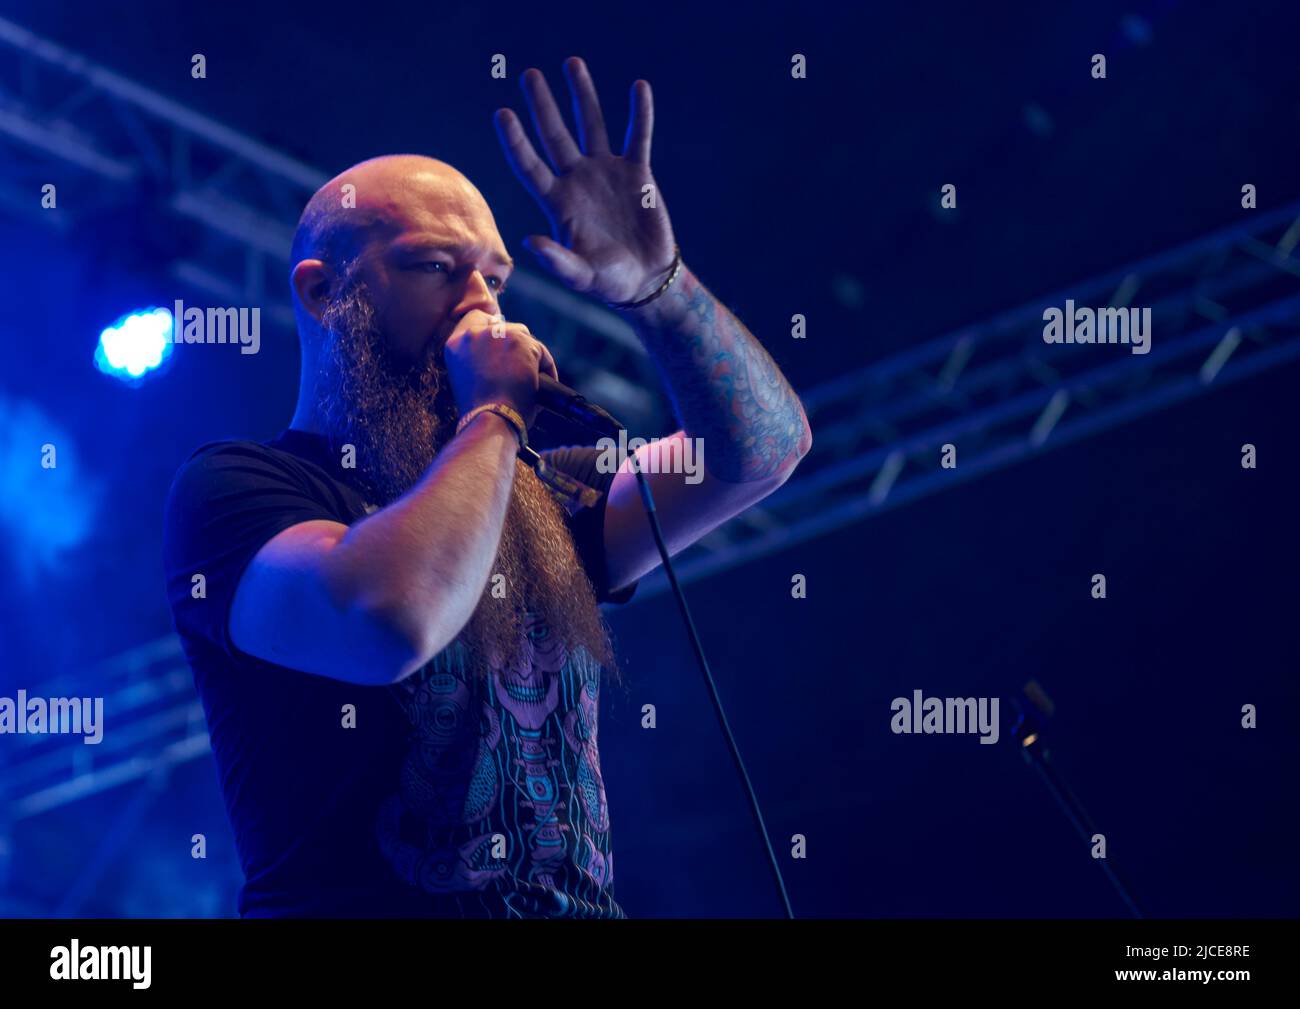 Fractions performs at Bloodstock Open Air Festival, Catton Park, Derbyshire, UK. 12 Aug 2019. Credit: Will Tudor/Alamy Stock Photo